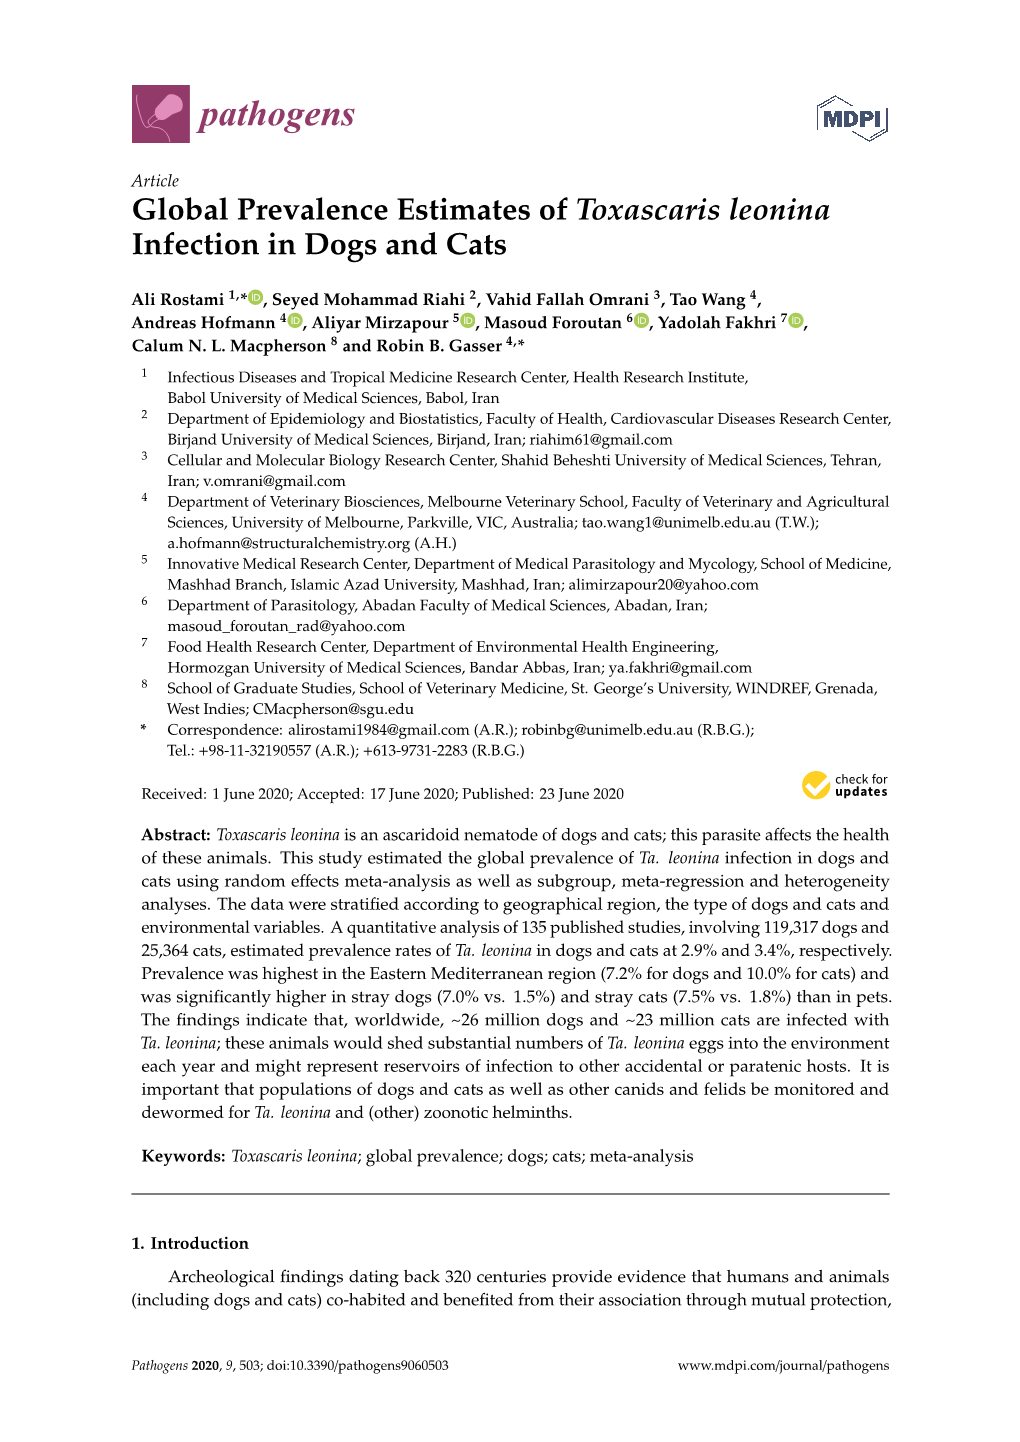 Global Prevalence Estimates of Toxascaris Leonina Infection in Dogs and Cats